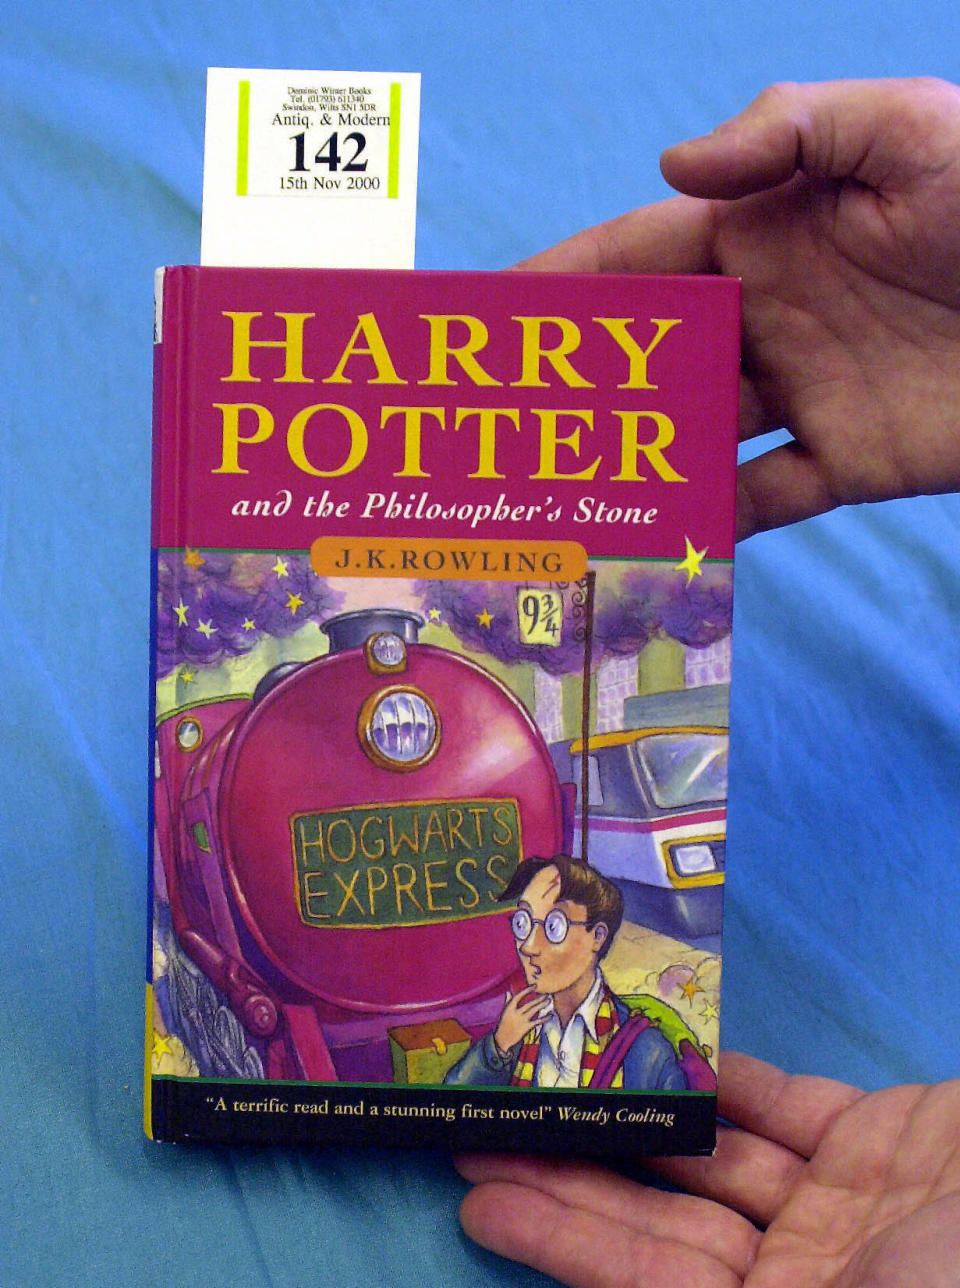 Lot 142 - Harry Potter and the Philosopher's Stone at Dominic Winter Book Auctions in Swindon.  The copy of the first edition which was published just three years ago, is expected to fetch up to   5,000 at auction.   * Only 500 copies of JK Rowling's Harry Potter And The Philosopher's Stone were issued, according to Dominic Winter Book Auctions, of those, 200 were paperback proofs and 300 were hardbacks.   (Photo by Barry Batchelor - PA Images/PA Images via Getty Images)